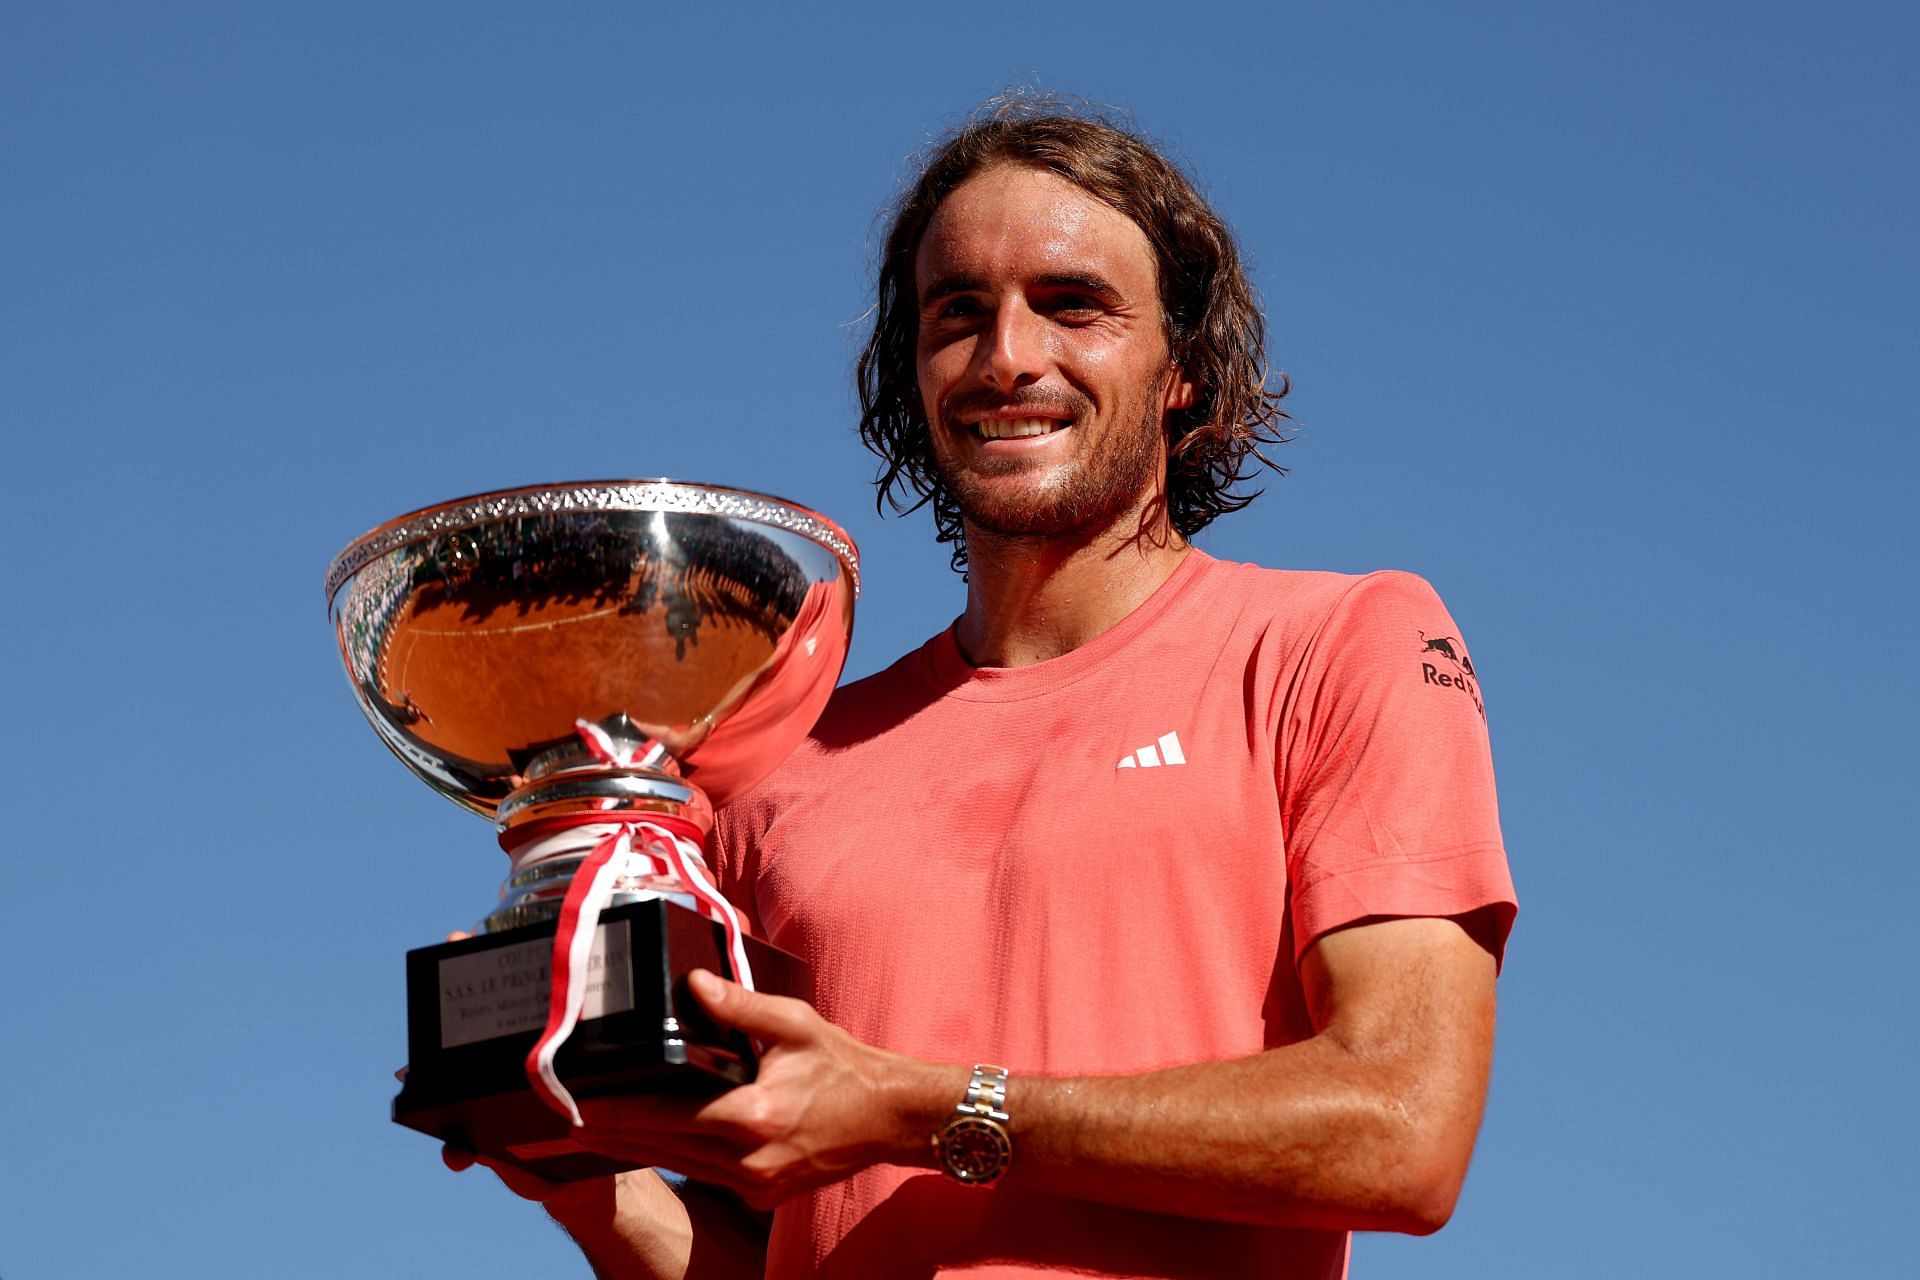 Stefanos Tsitsipas is a former finalist at the Madrid Open.